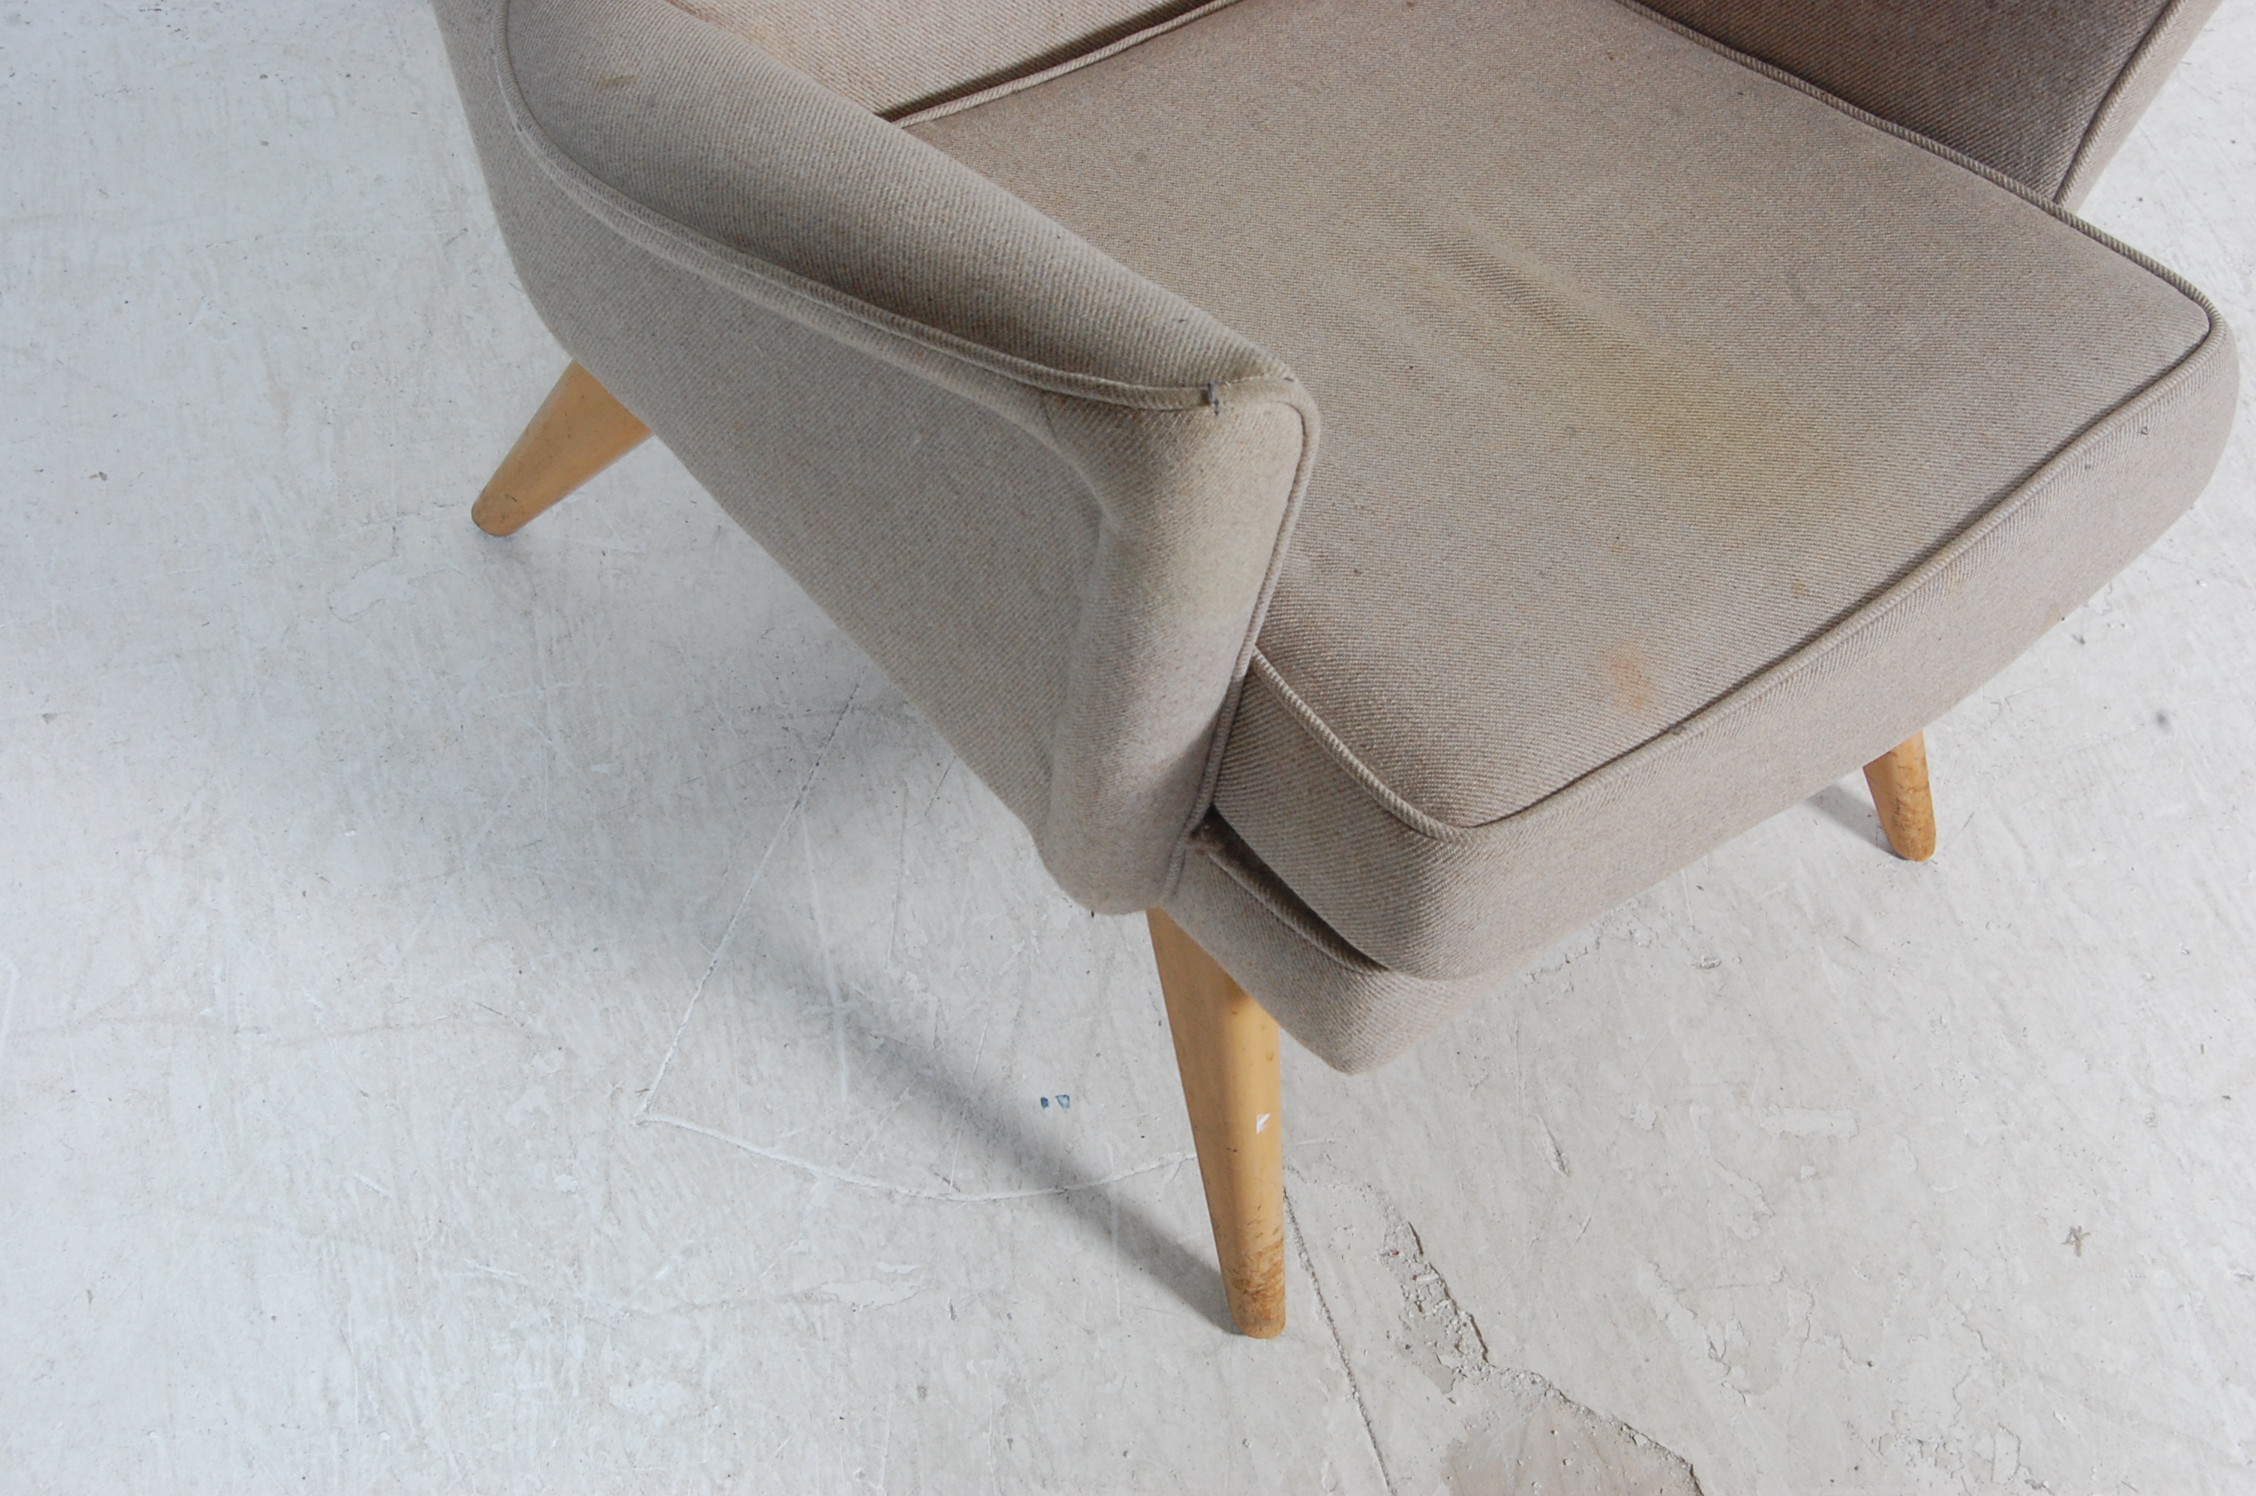 RETRO VINTAGE DANISH INSPIRED ARMCHAIR / EASY CHAIR - Image 5 of 5